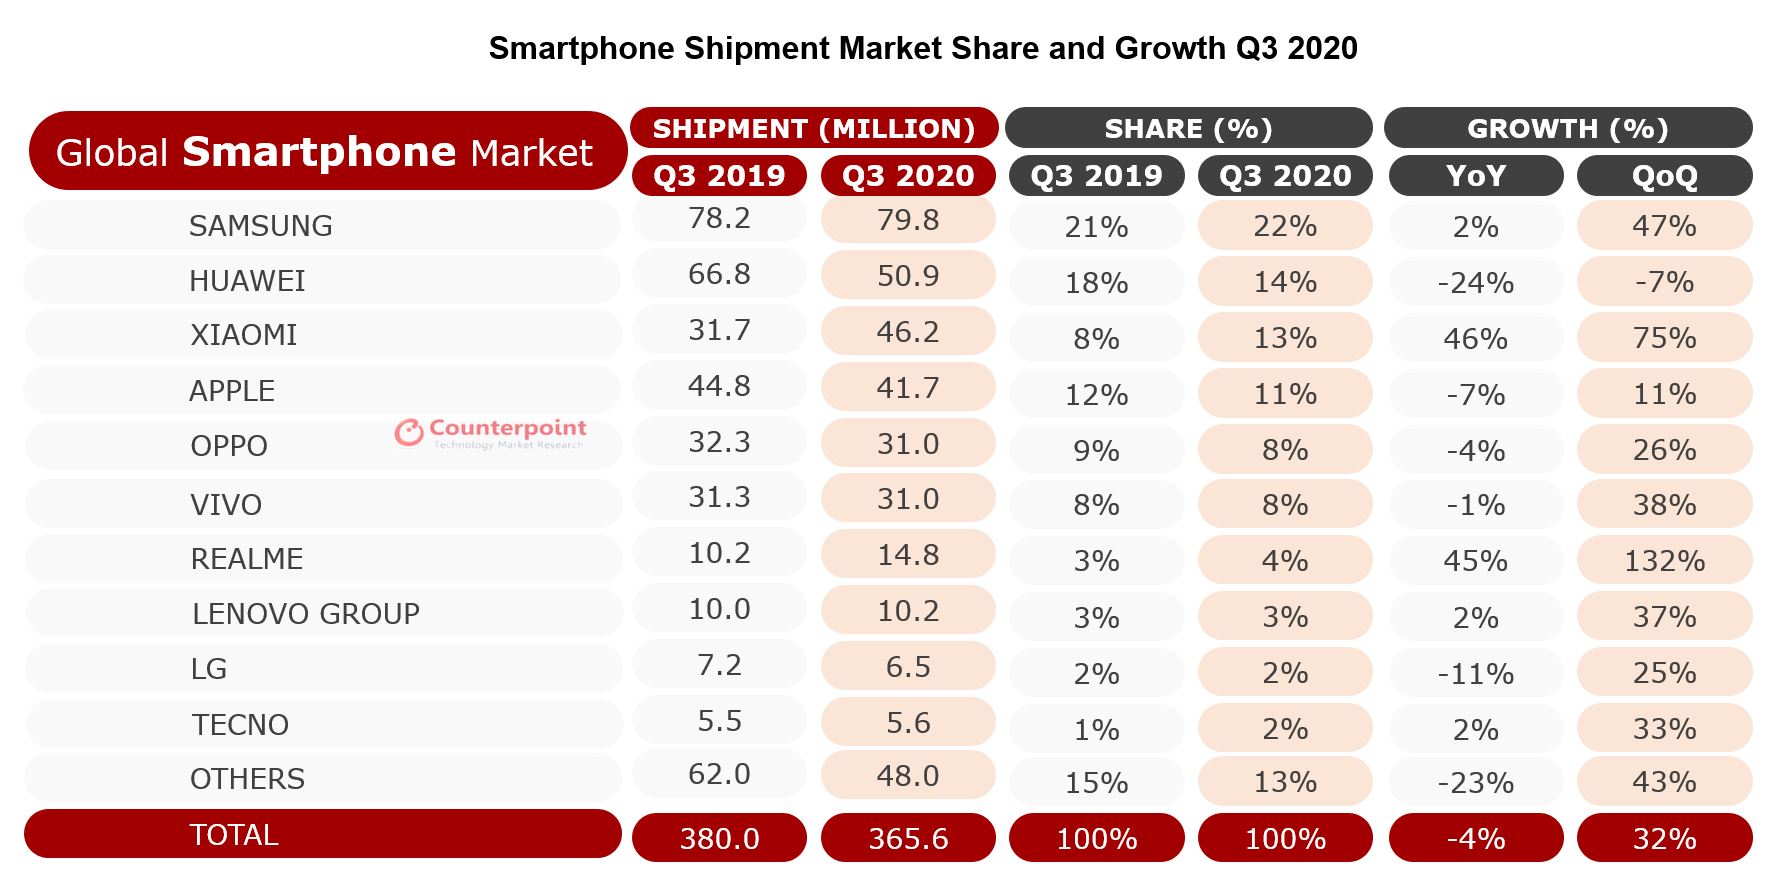 Top 10 OEMs market share